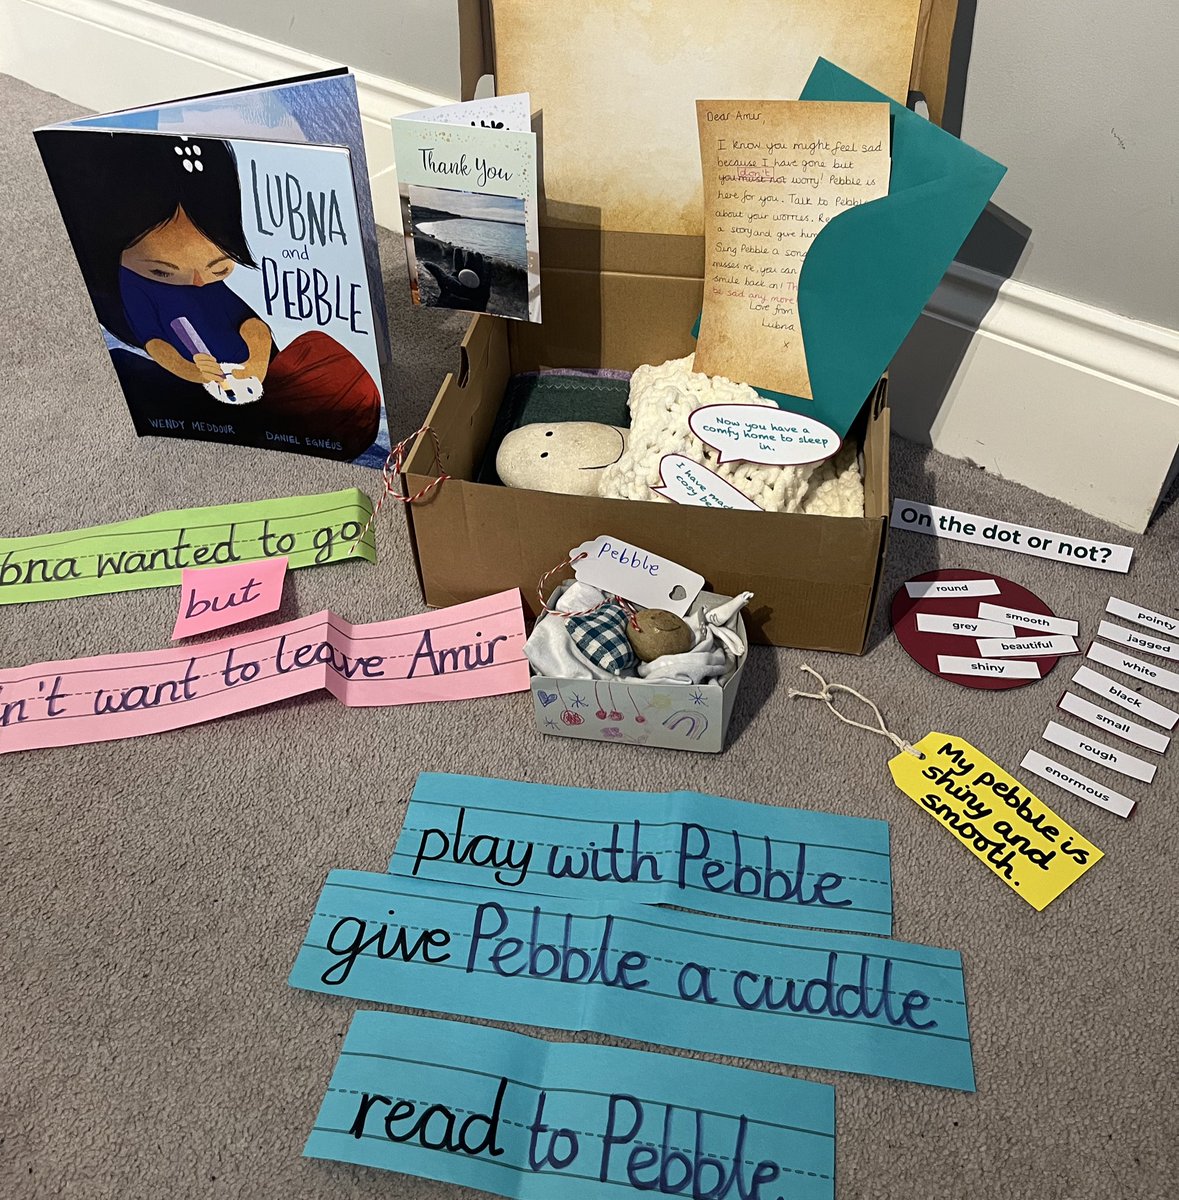 Ready for a day exploring how to #TeachThroughaText with Year 1 teachers around the globe, exemplifying the approach with one of our brand new #WritingRoots for the gorgeous Lubna and Pebble by @WendyMeddour and @DanielEgneus ⛺️🌊🧺 @theliteracytree